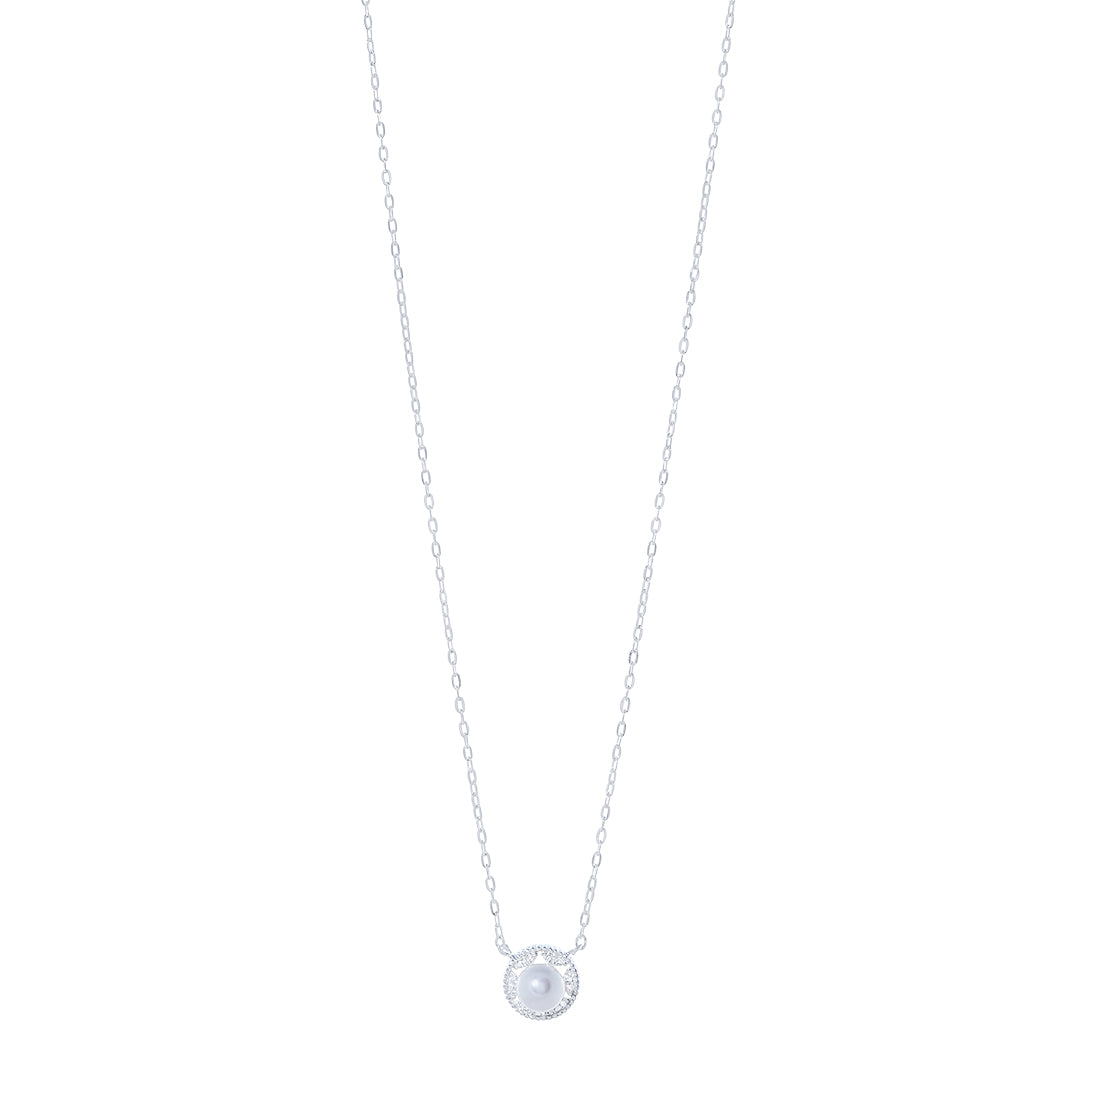 Synthetic Pearl Stud Earrings and Necklace With Cubic Zirconia Set in Sterling Silver Jewellery Sets Bevilles 